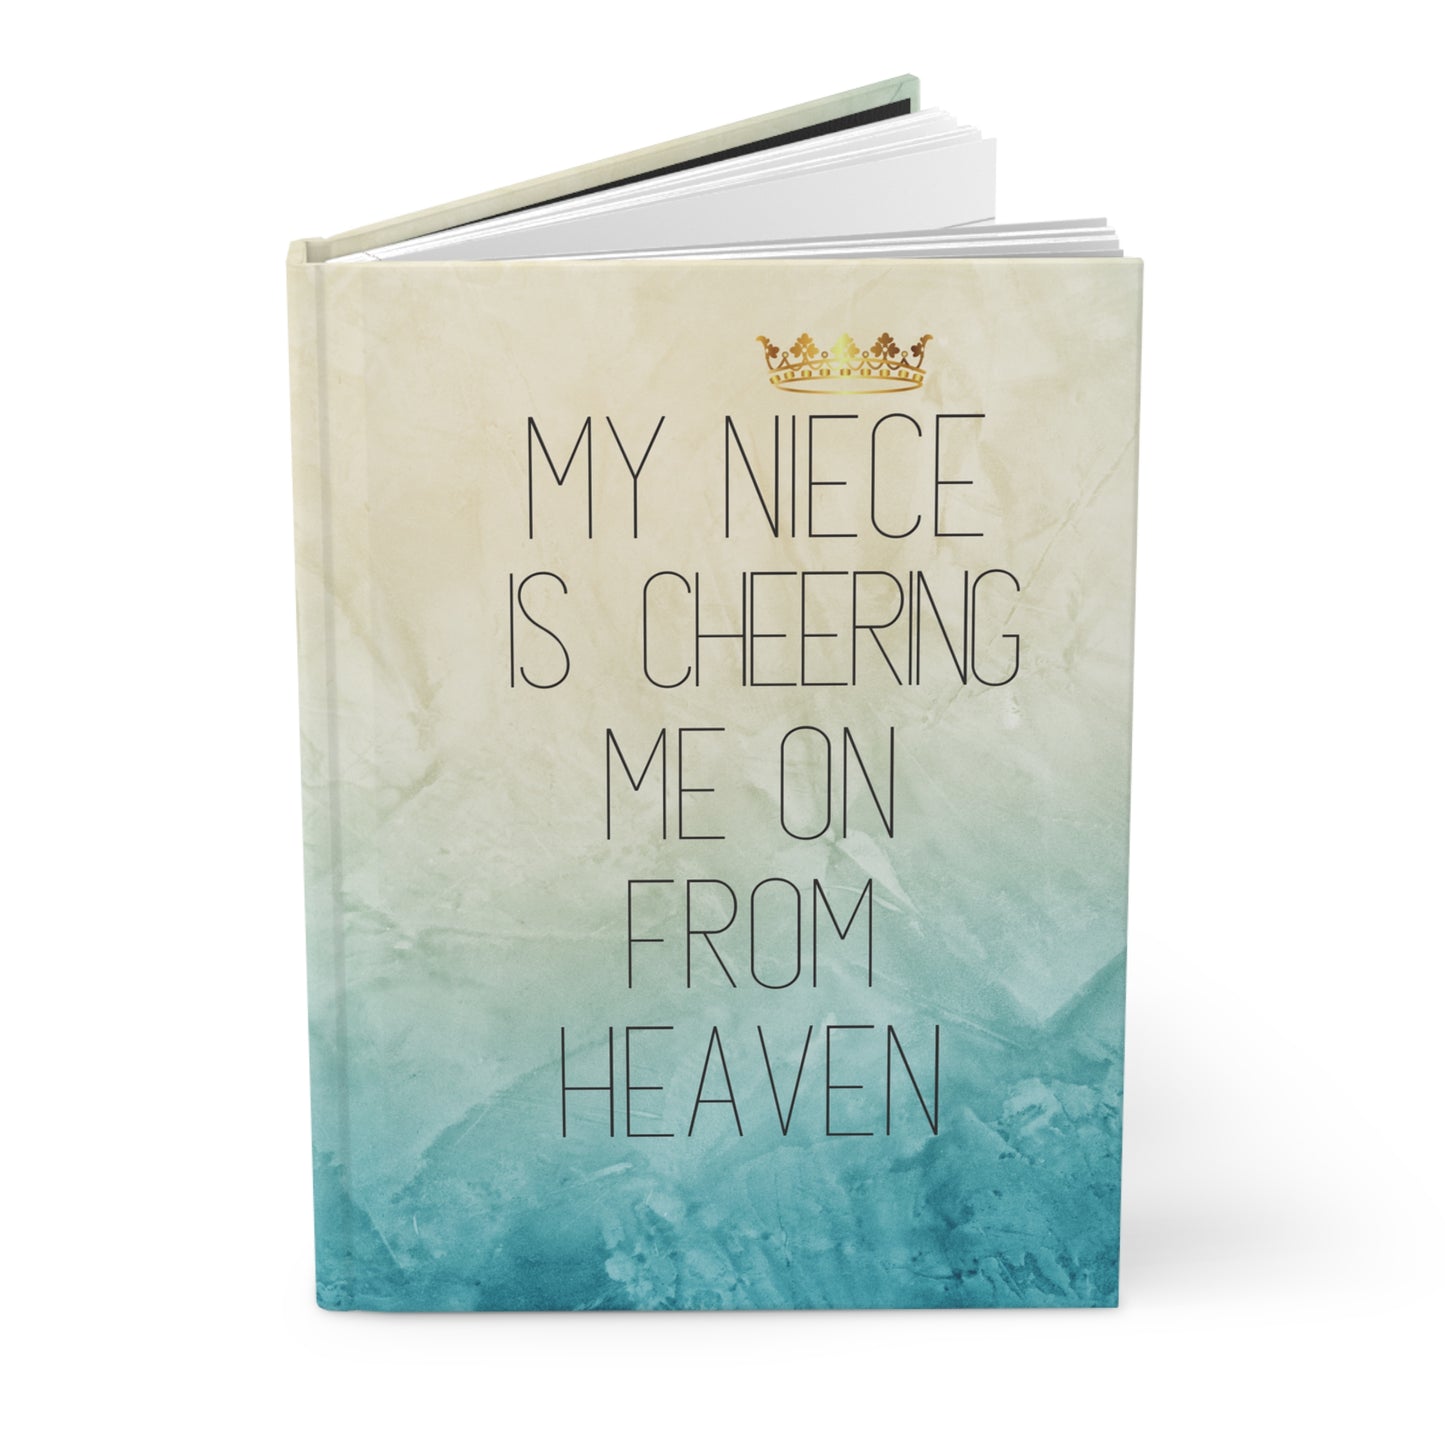 Grief Journal for Loss of Niece, Cheering Me On From Heaven